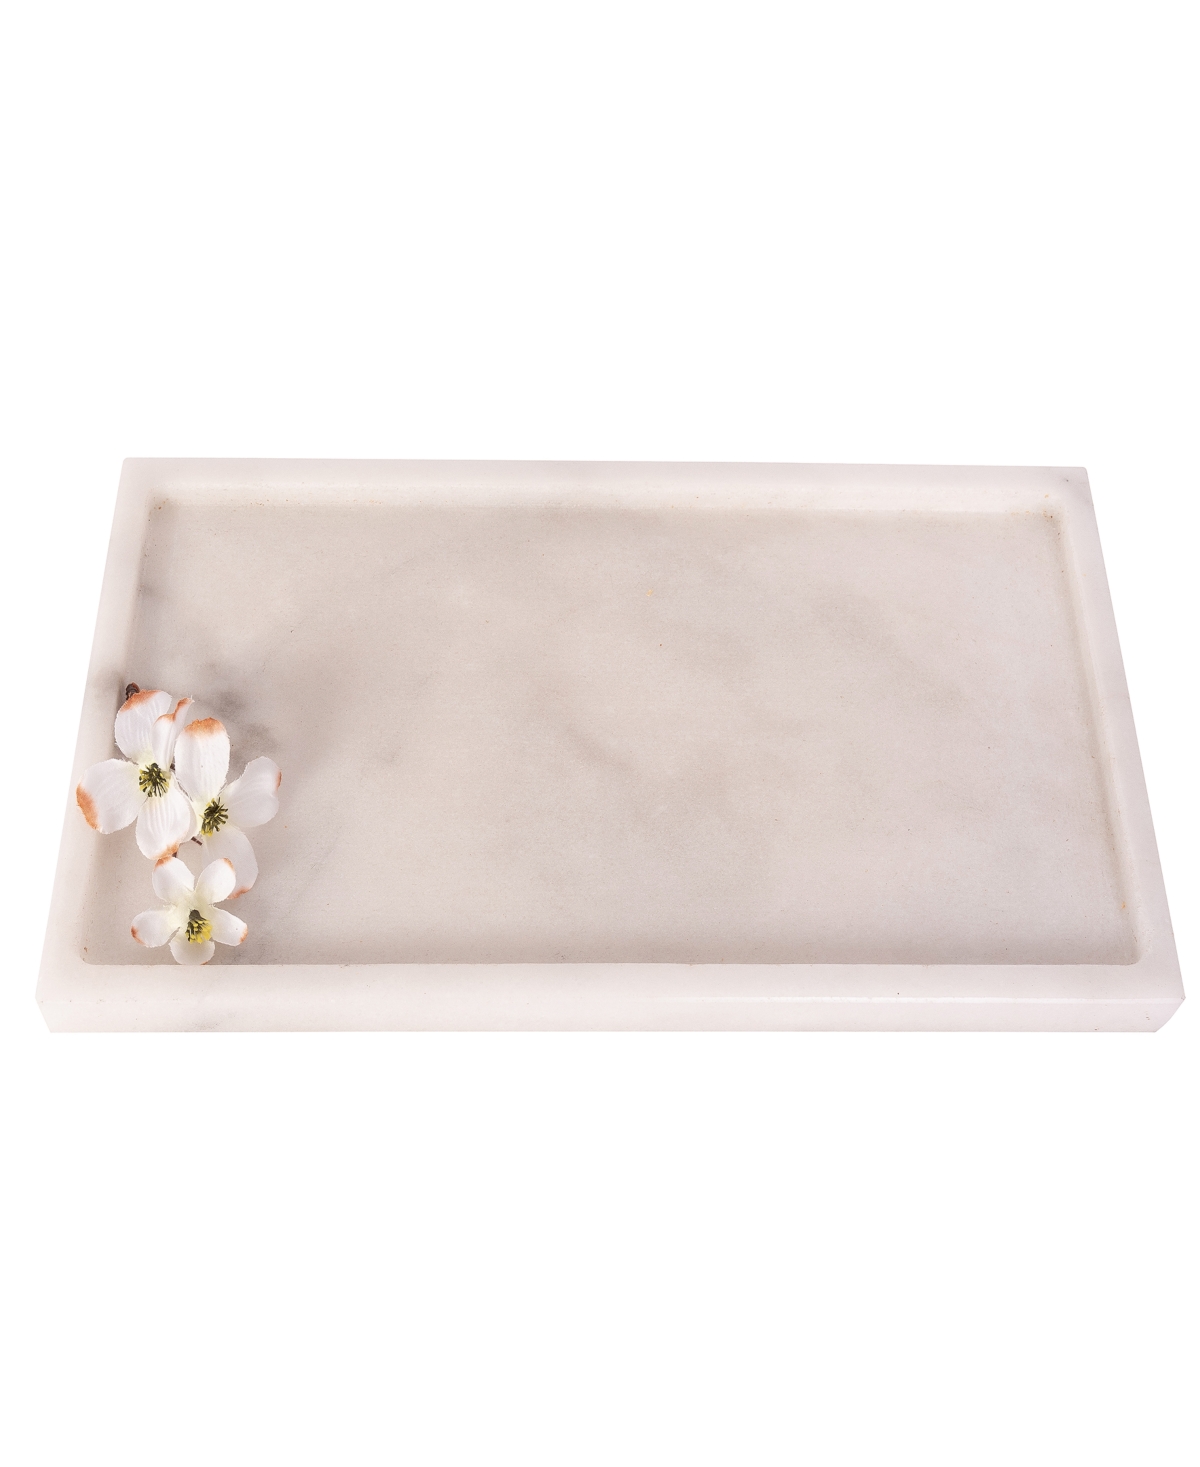 Artifacts Trading Company Marble Rectangular Tray, 15" X 8" X 0.3" In White Matte